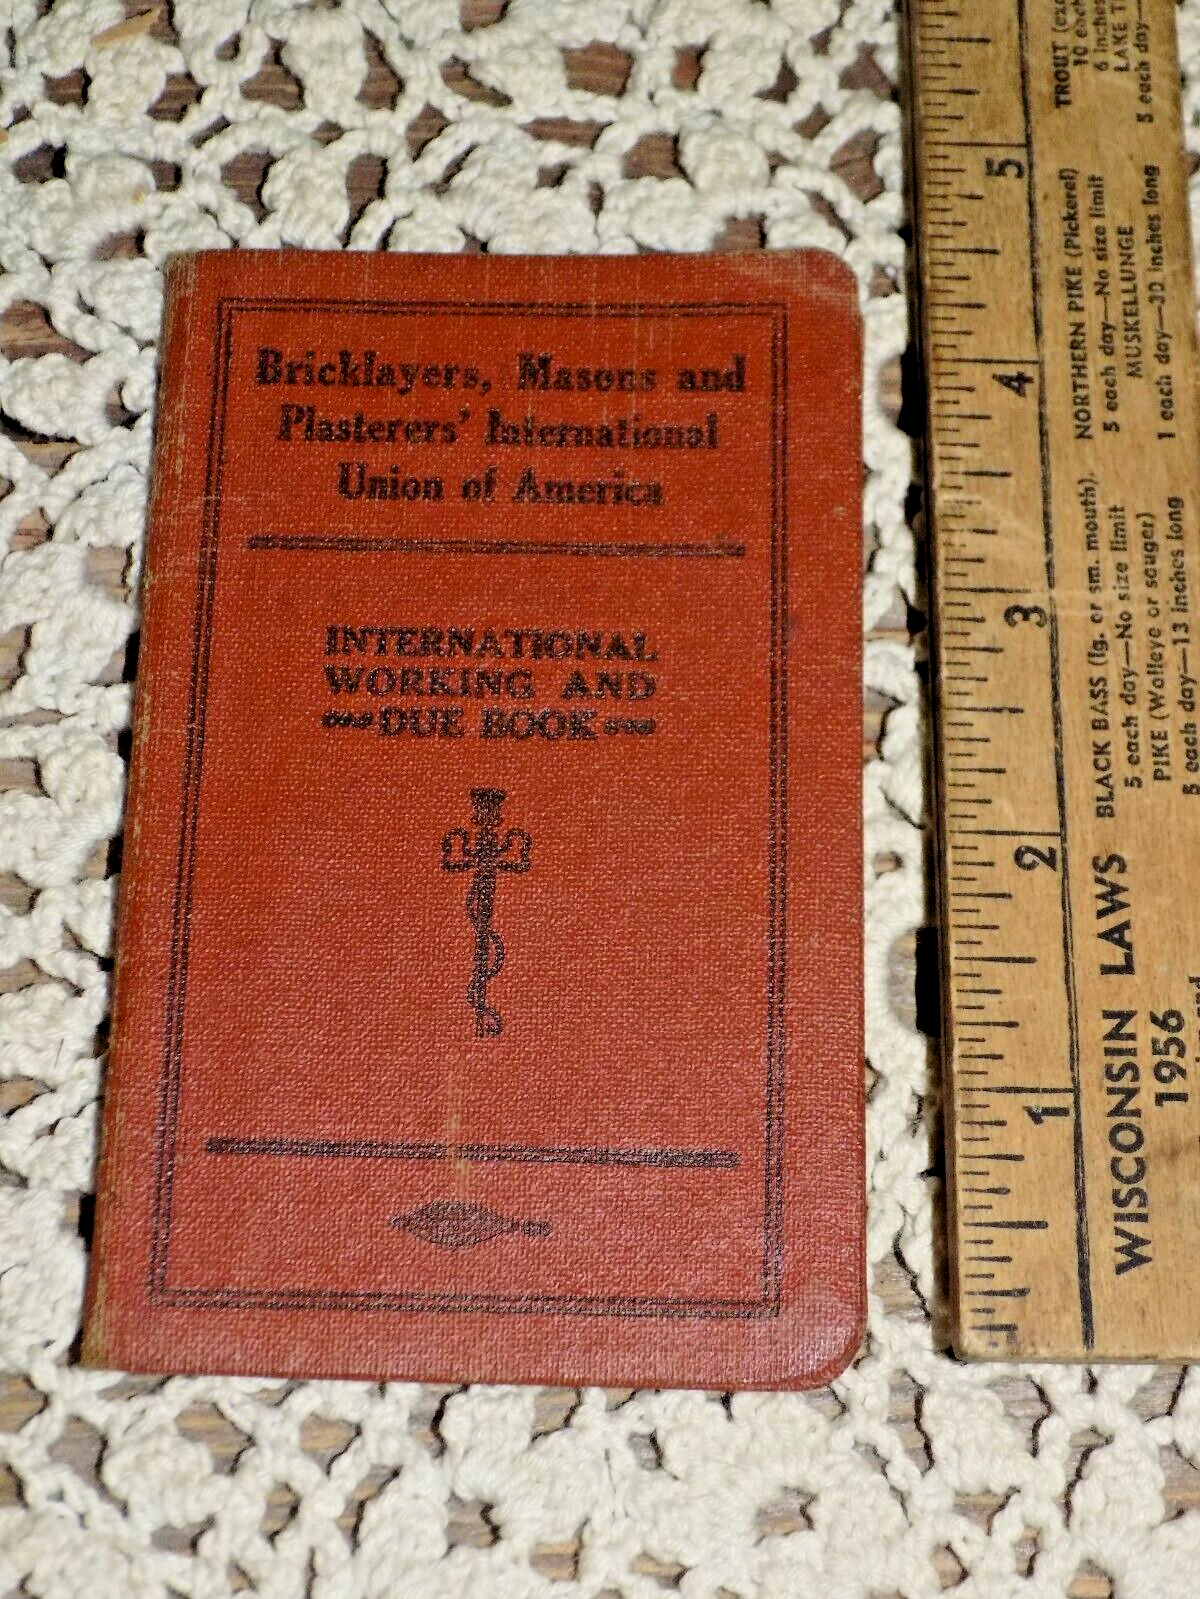 Vtg 1931-35 WorK& DUES BOOK Bricklayers Masons &PLasTerers Int Union of America